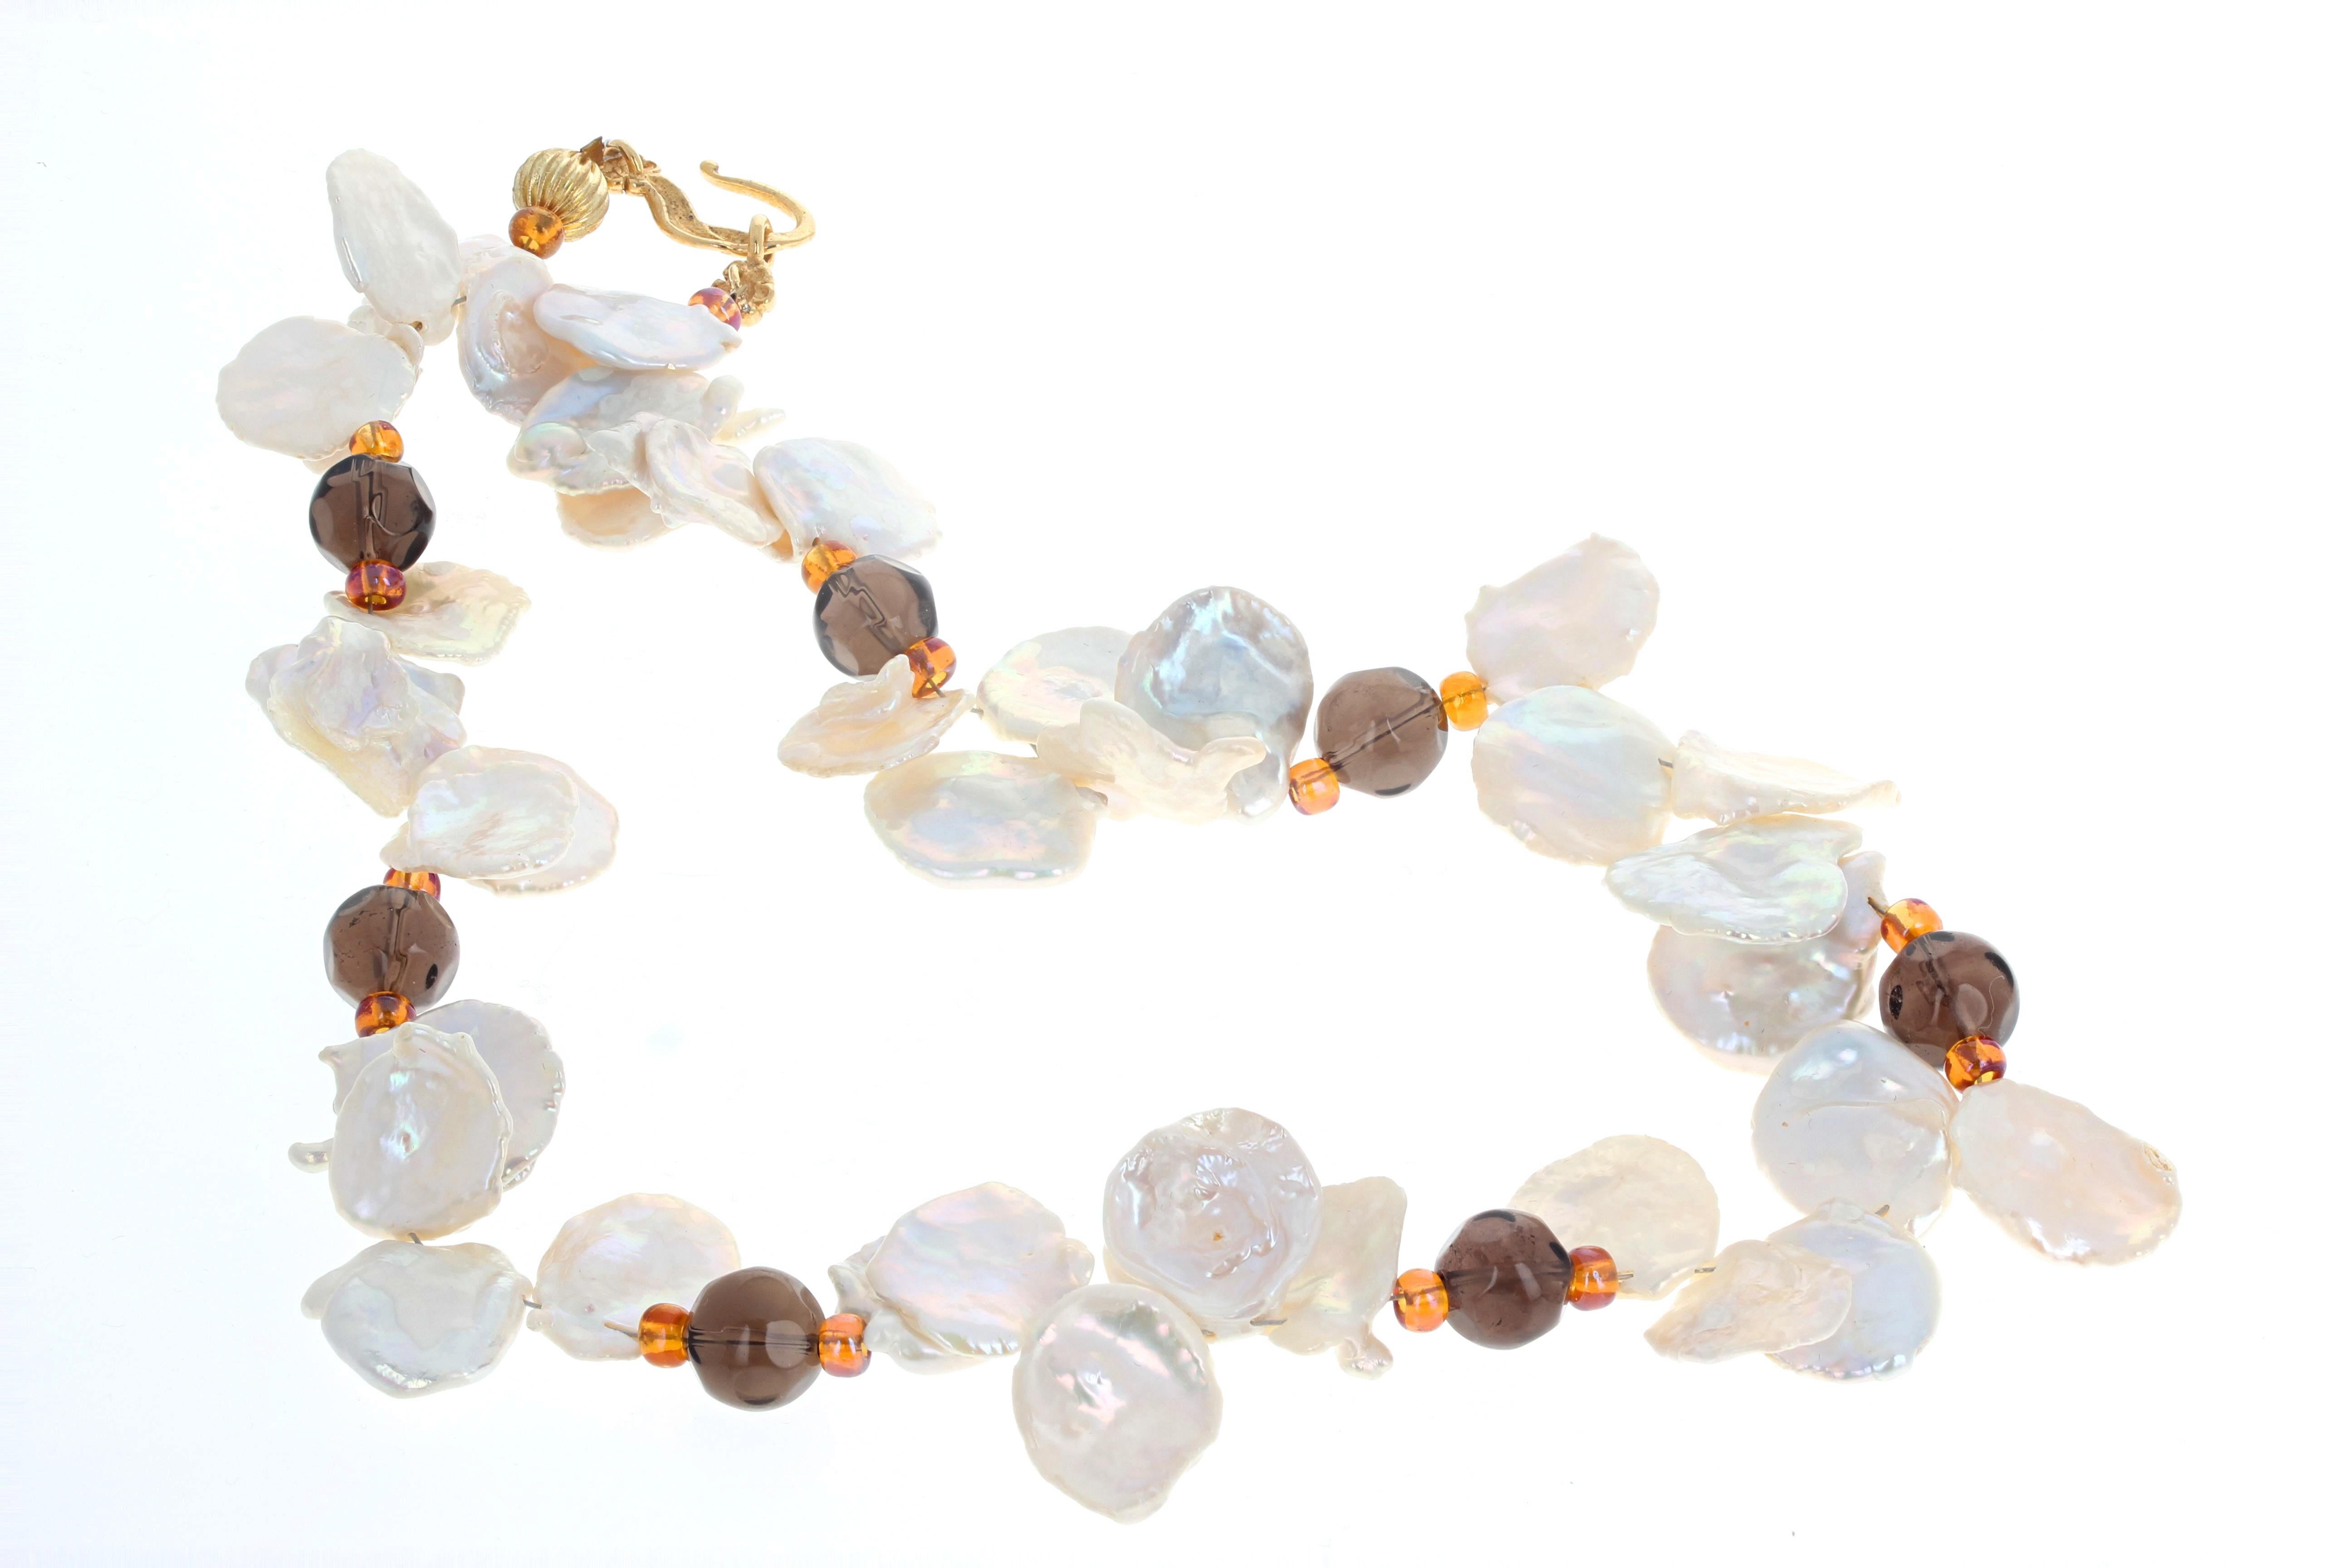 This elegant necklace of beautiful natural white glowing Keshi Pearls is enhanced with gem cut and highly polished natural real gem cut big Smoky Quartz rondels. The largest Pearls are approximately 19mm and the Smoky Quartz are 10mm.  The clasp is